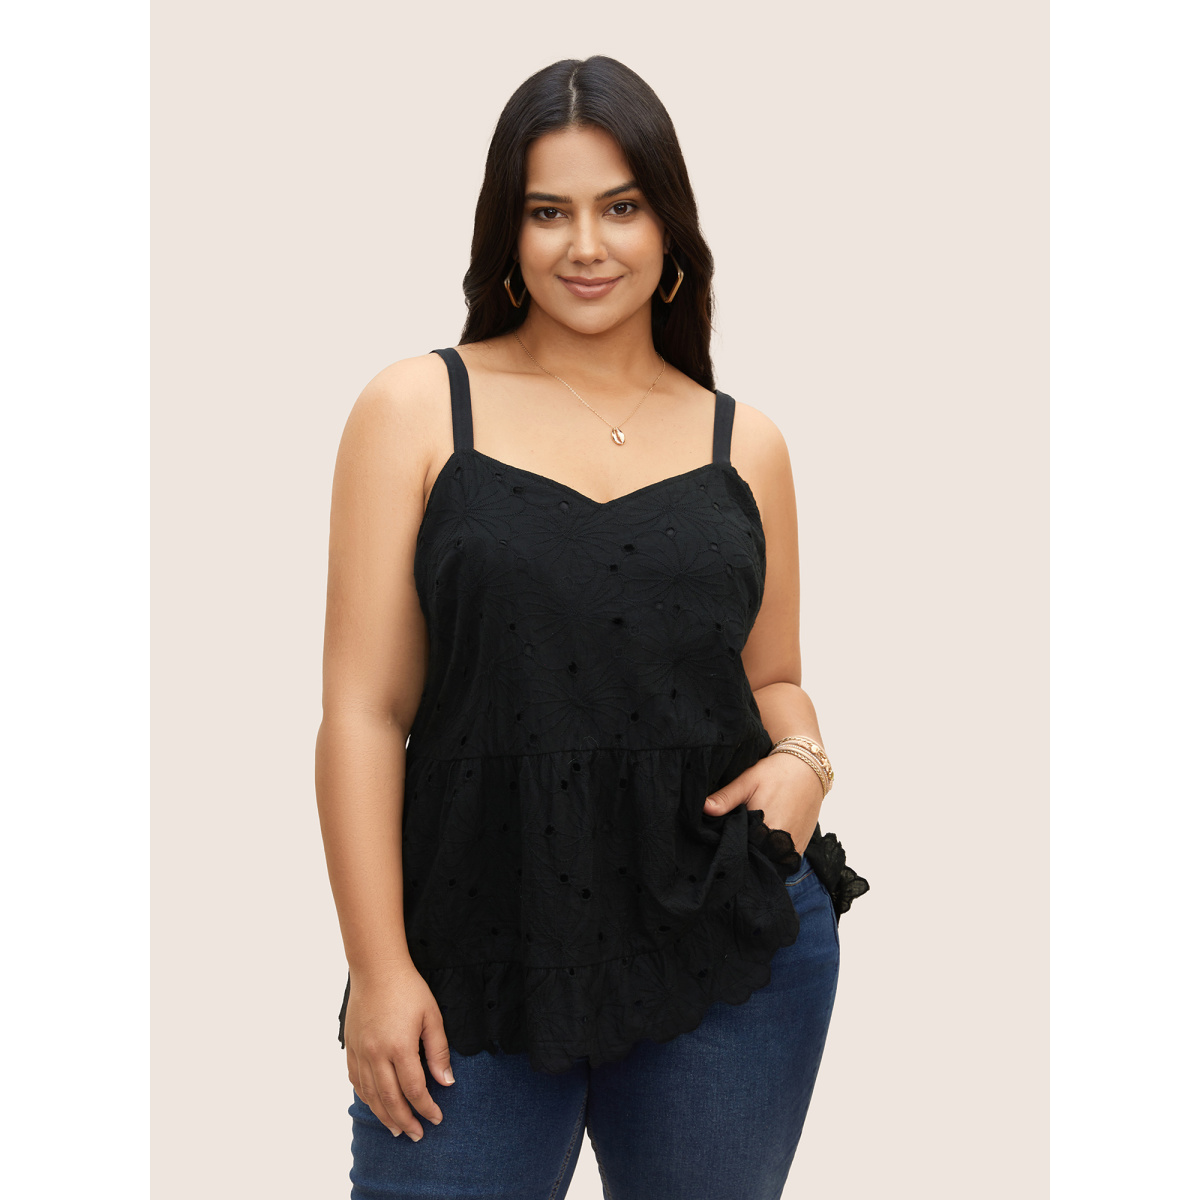 

Plus Size Solid Floral Cotton Blended Cami Top Women Black Resort Woven ribbon&lace trim Heart neckline Vacation Tank Tops Camis BloomChic